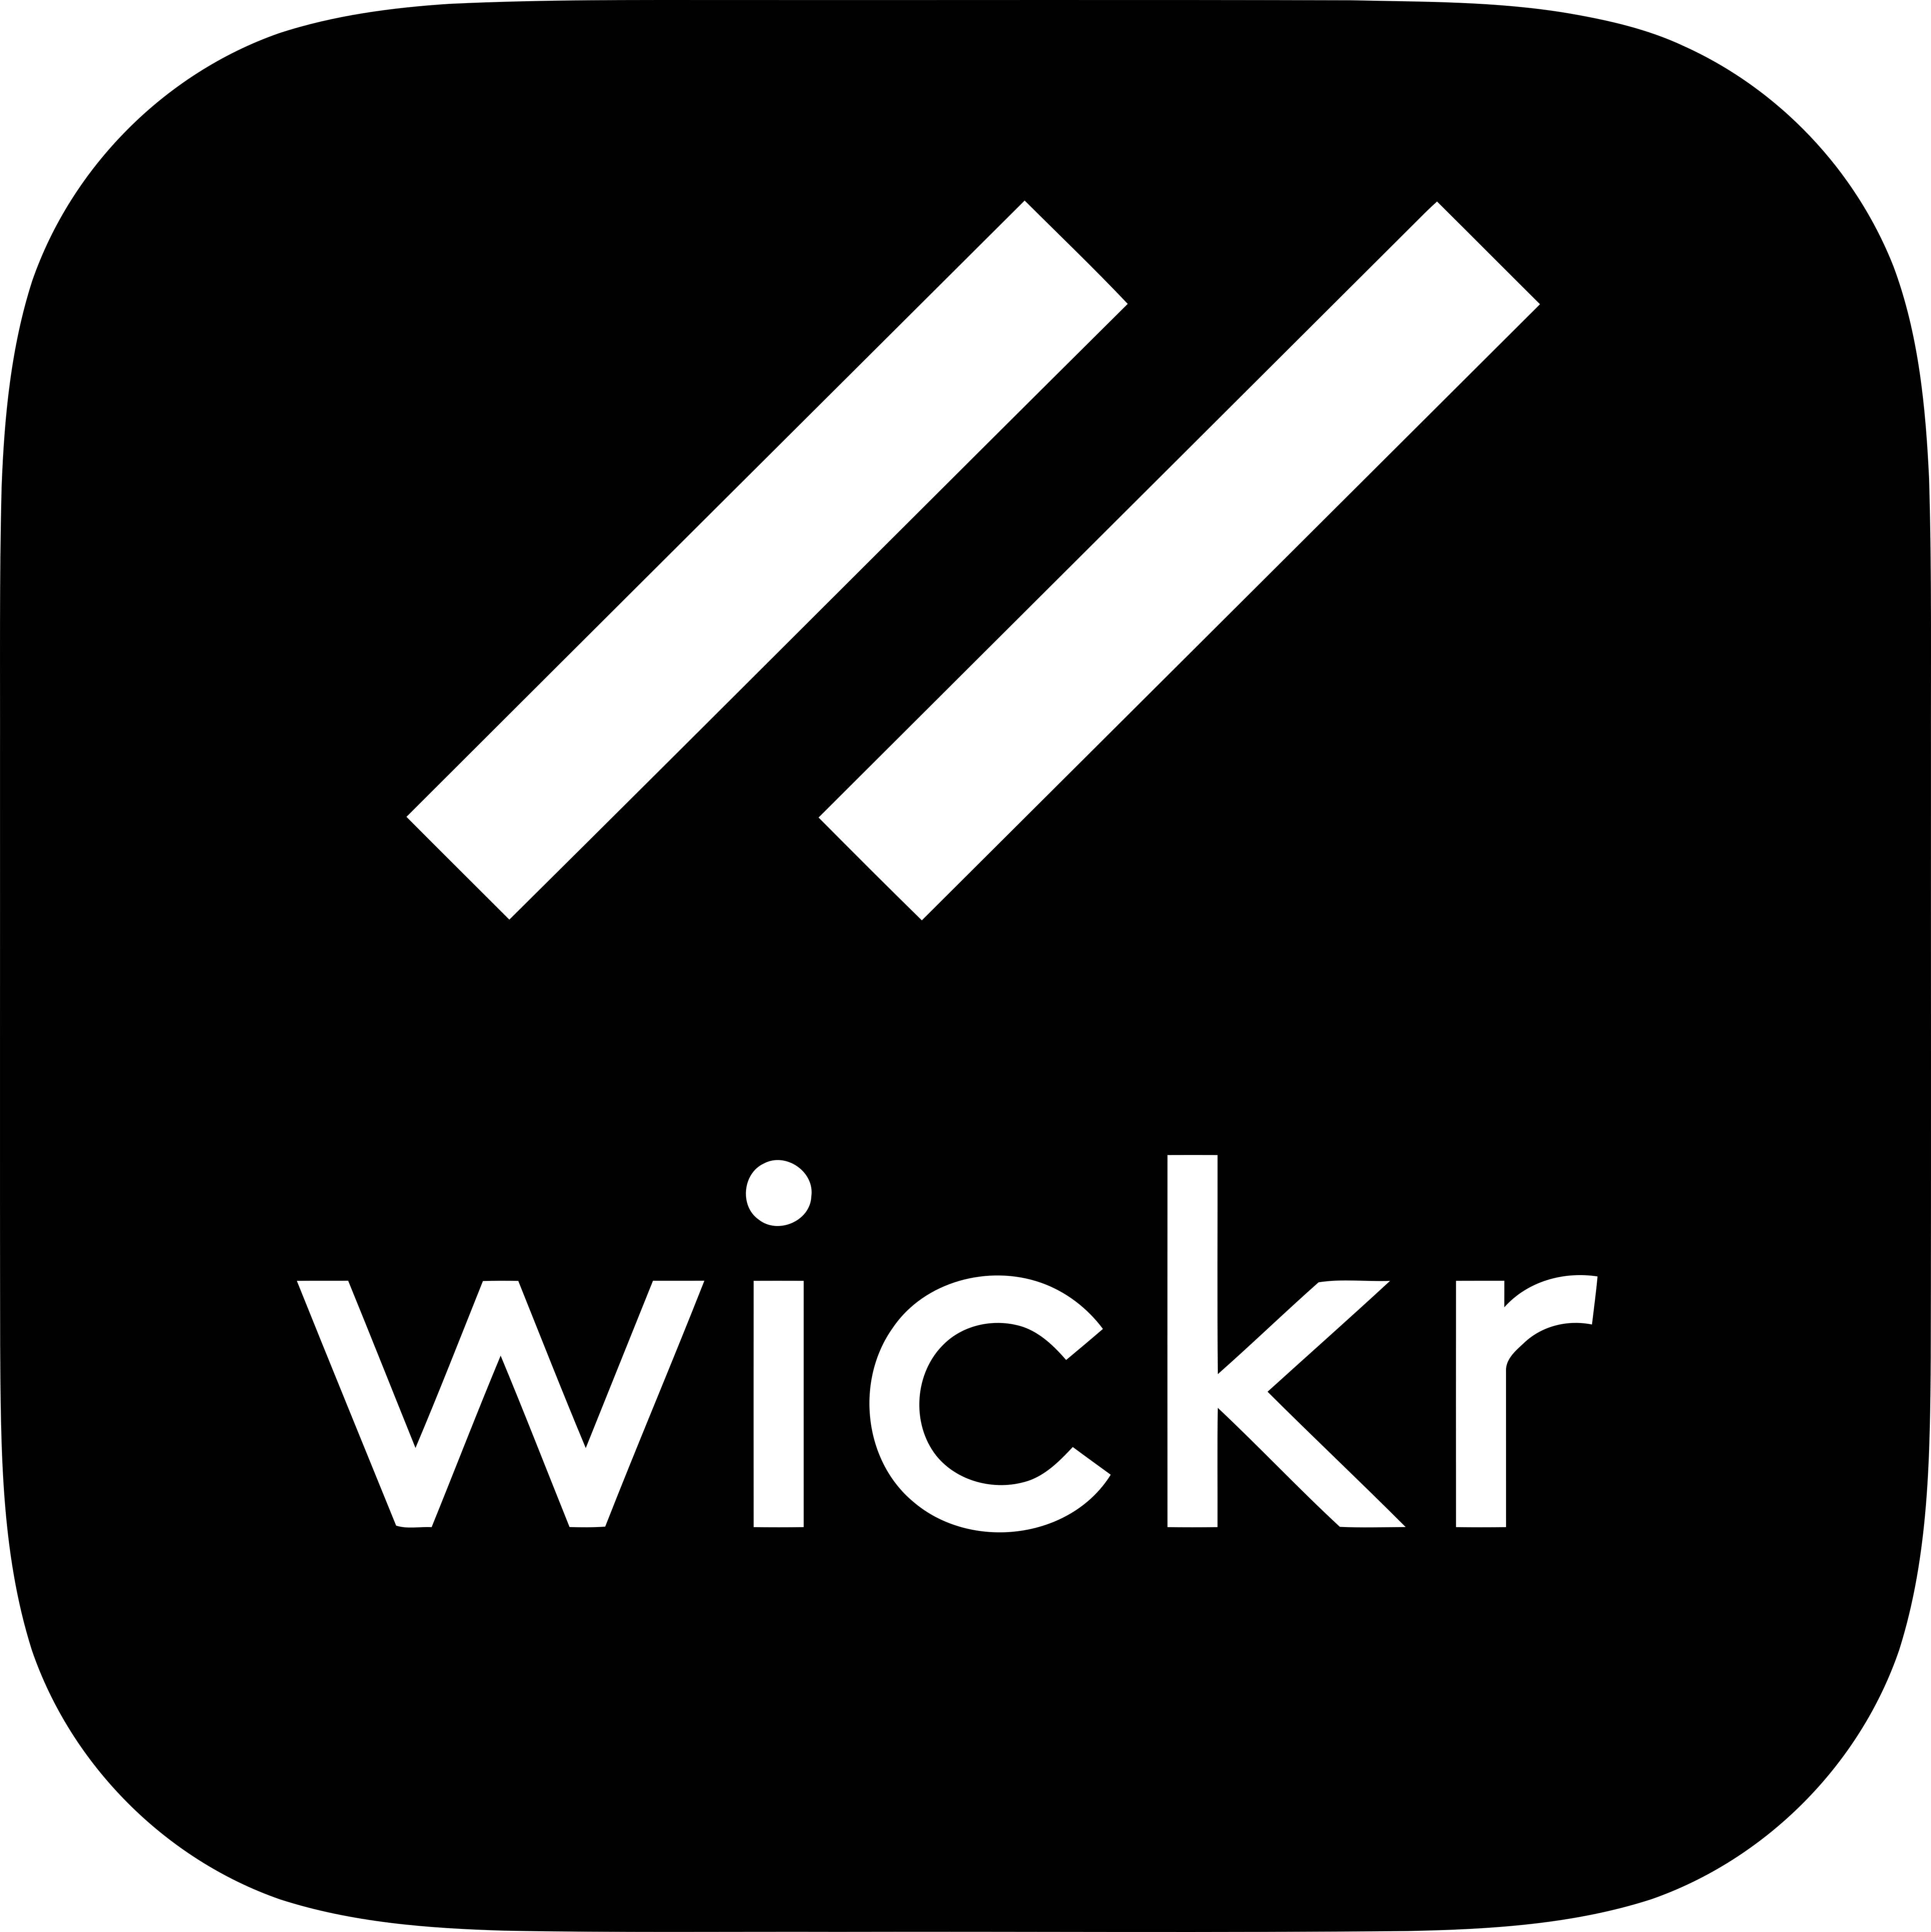 difference between wickr and wickr pro